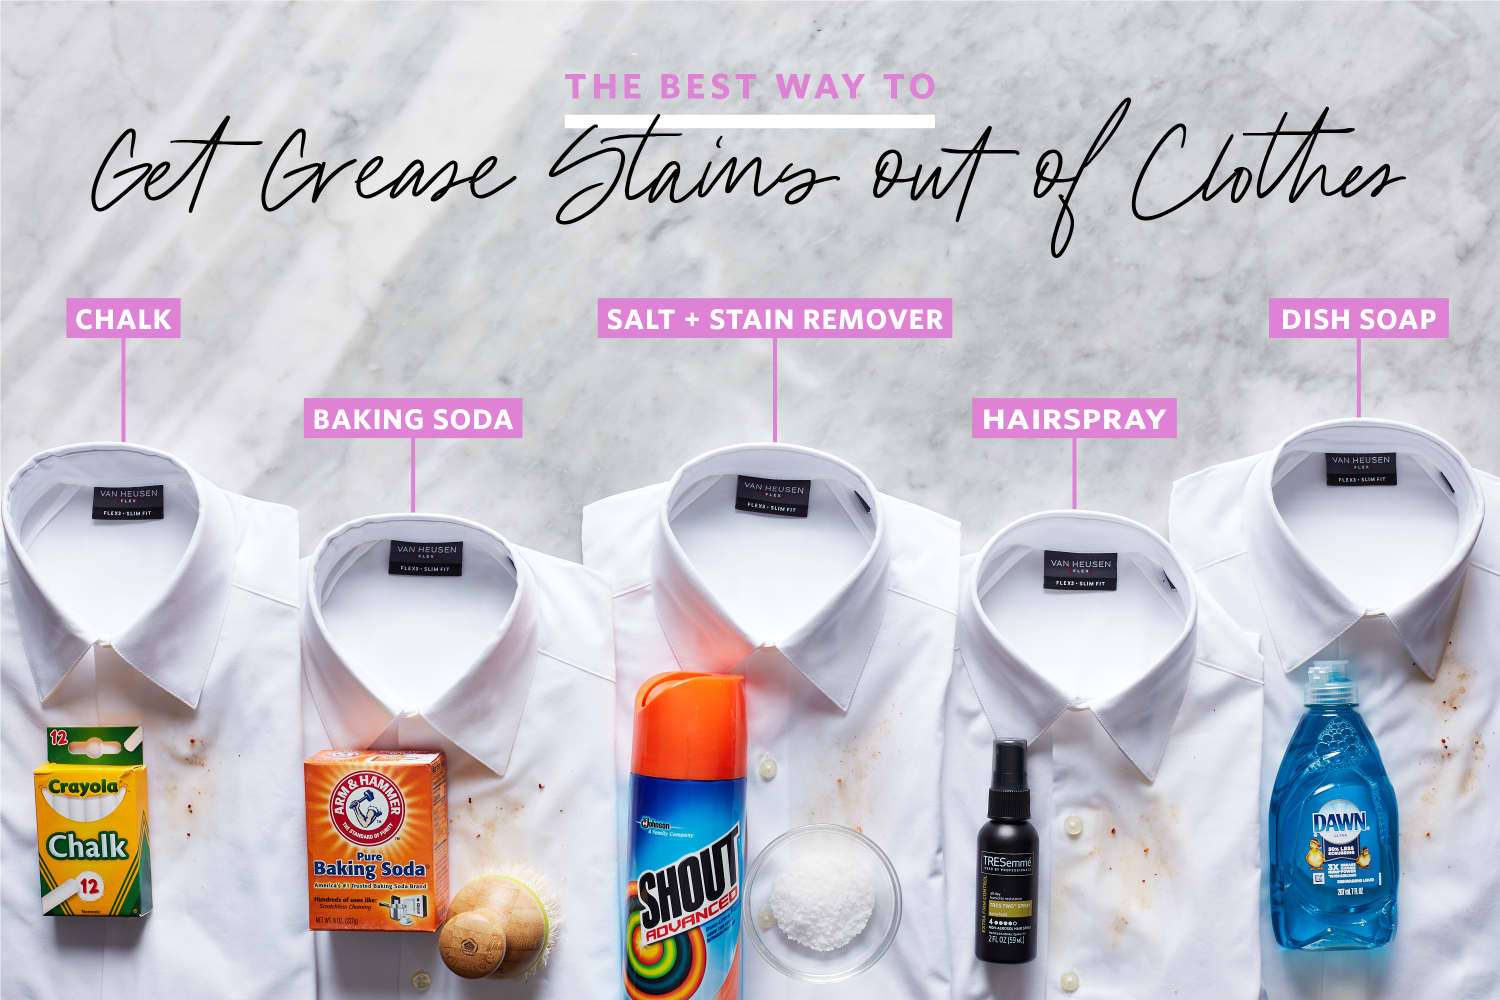 Best Way to Get Grease Stains Out of Clothing